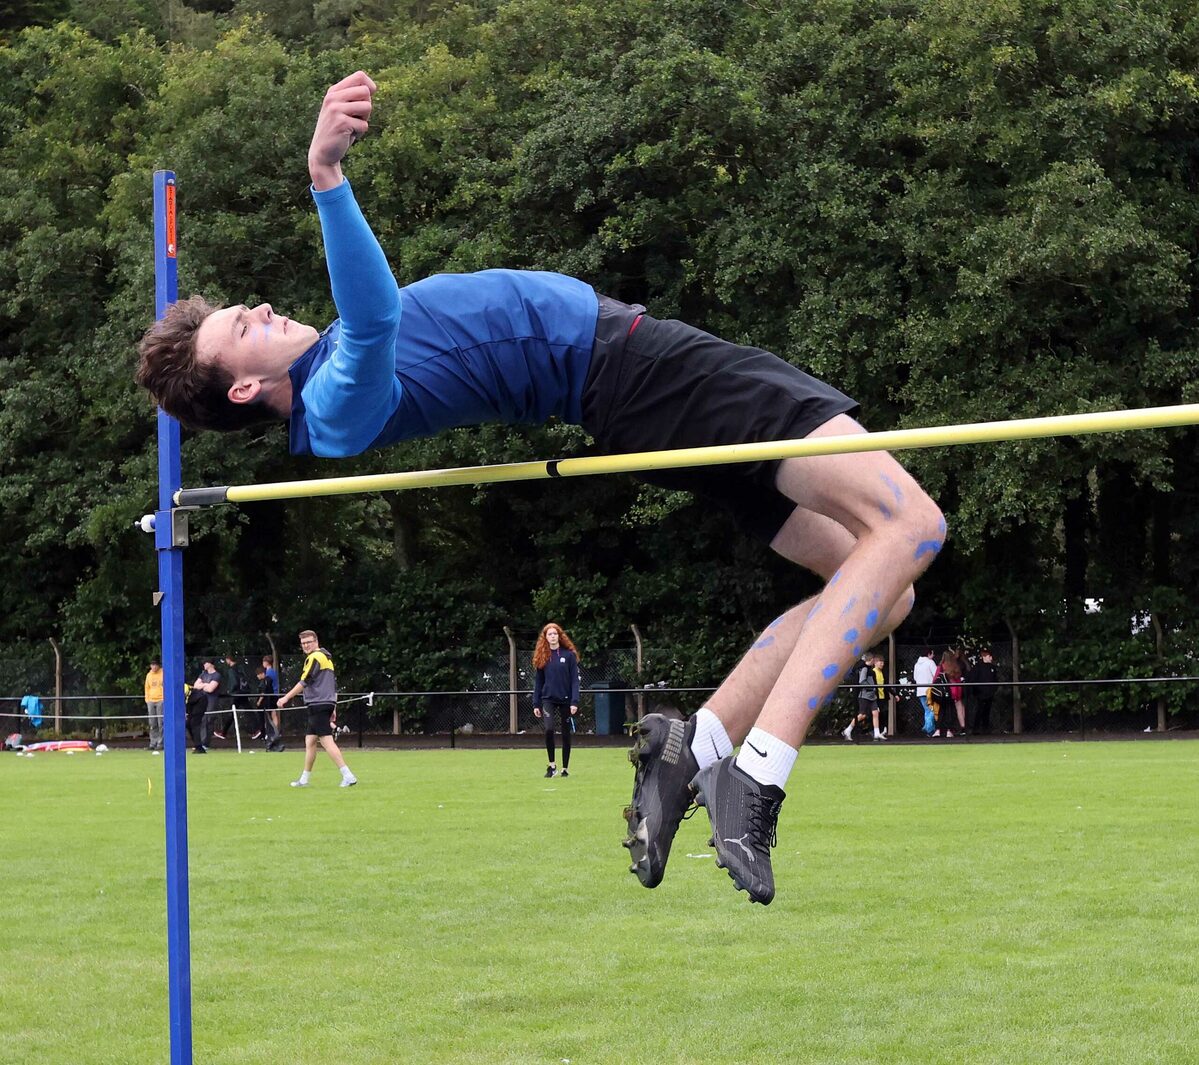 Medal success for Argyll athlete at national championships